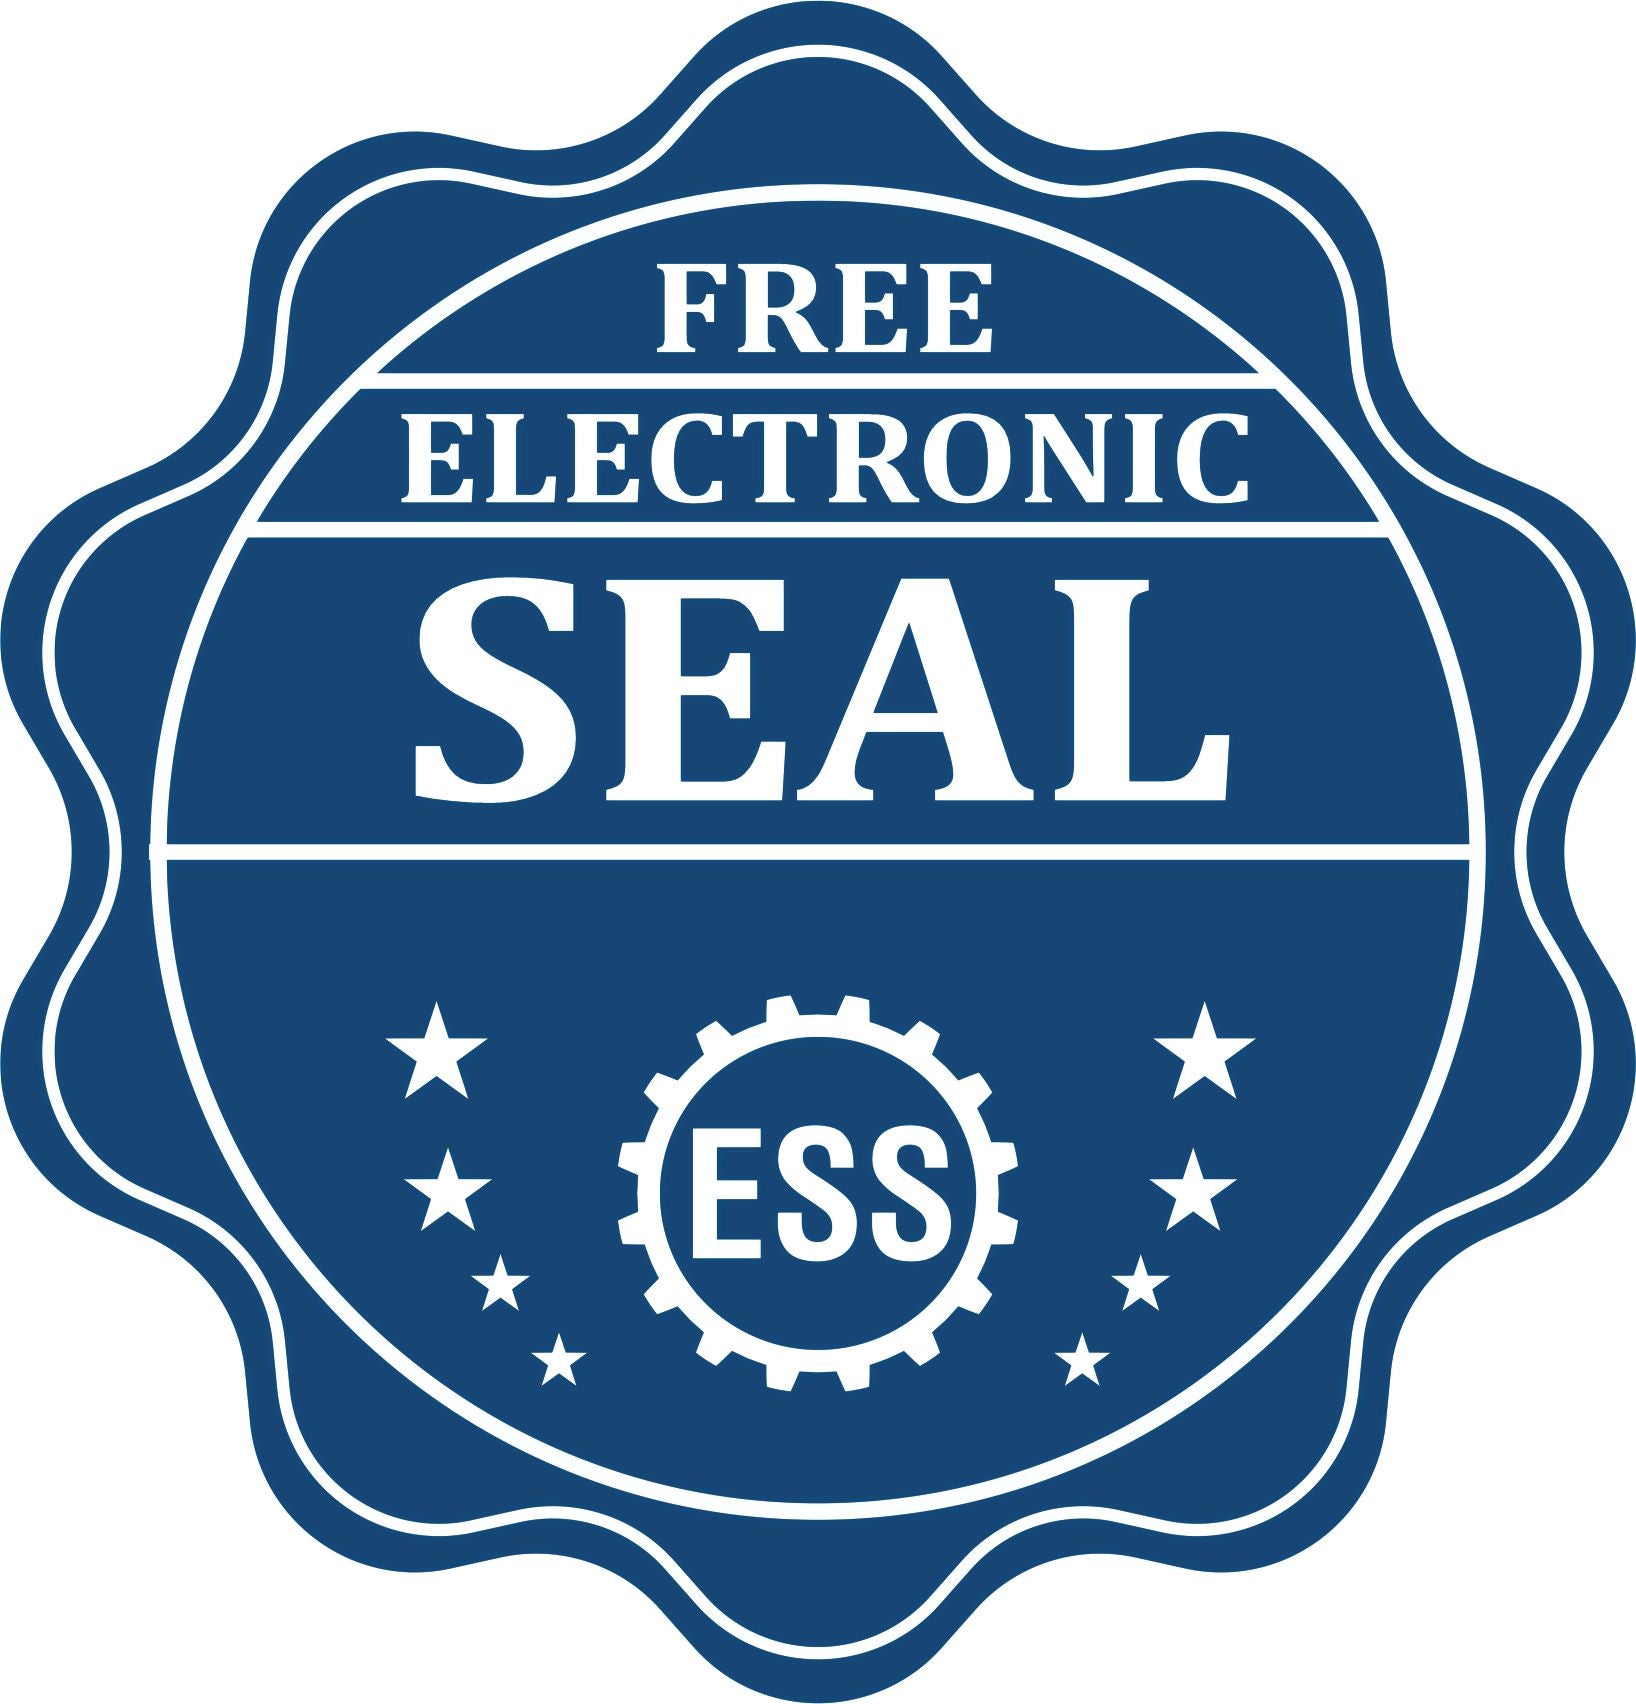 A badge showing a free electronic seal for the Slim Pre-Inked Arkansas Architect Seal Stamp with stars and the ESS gear on the emblem.